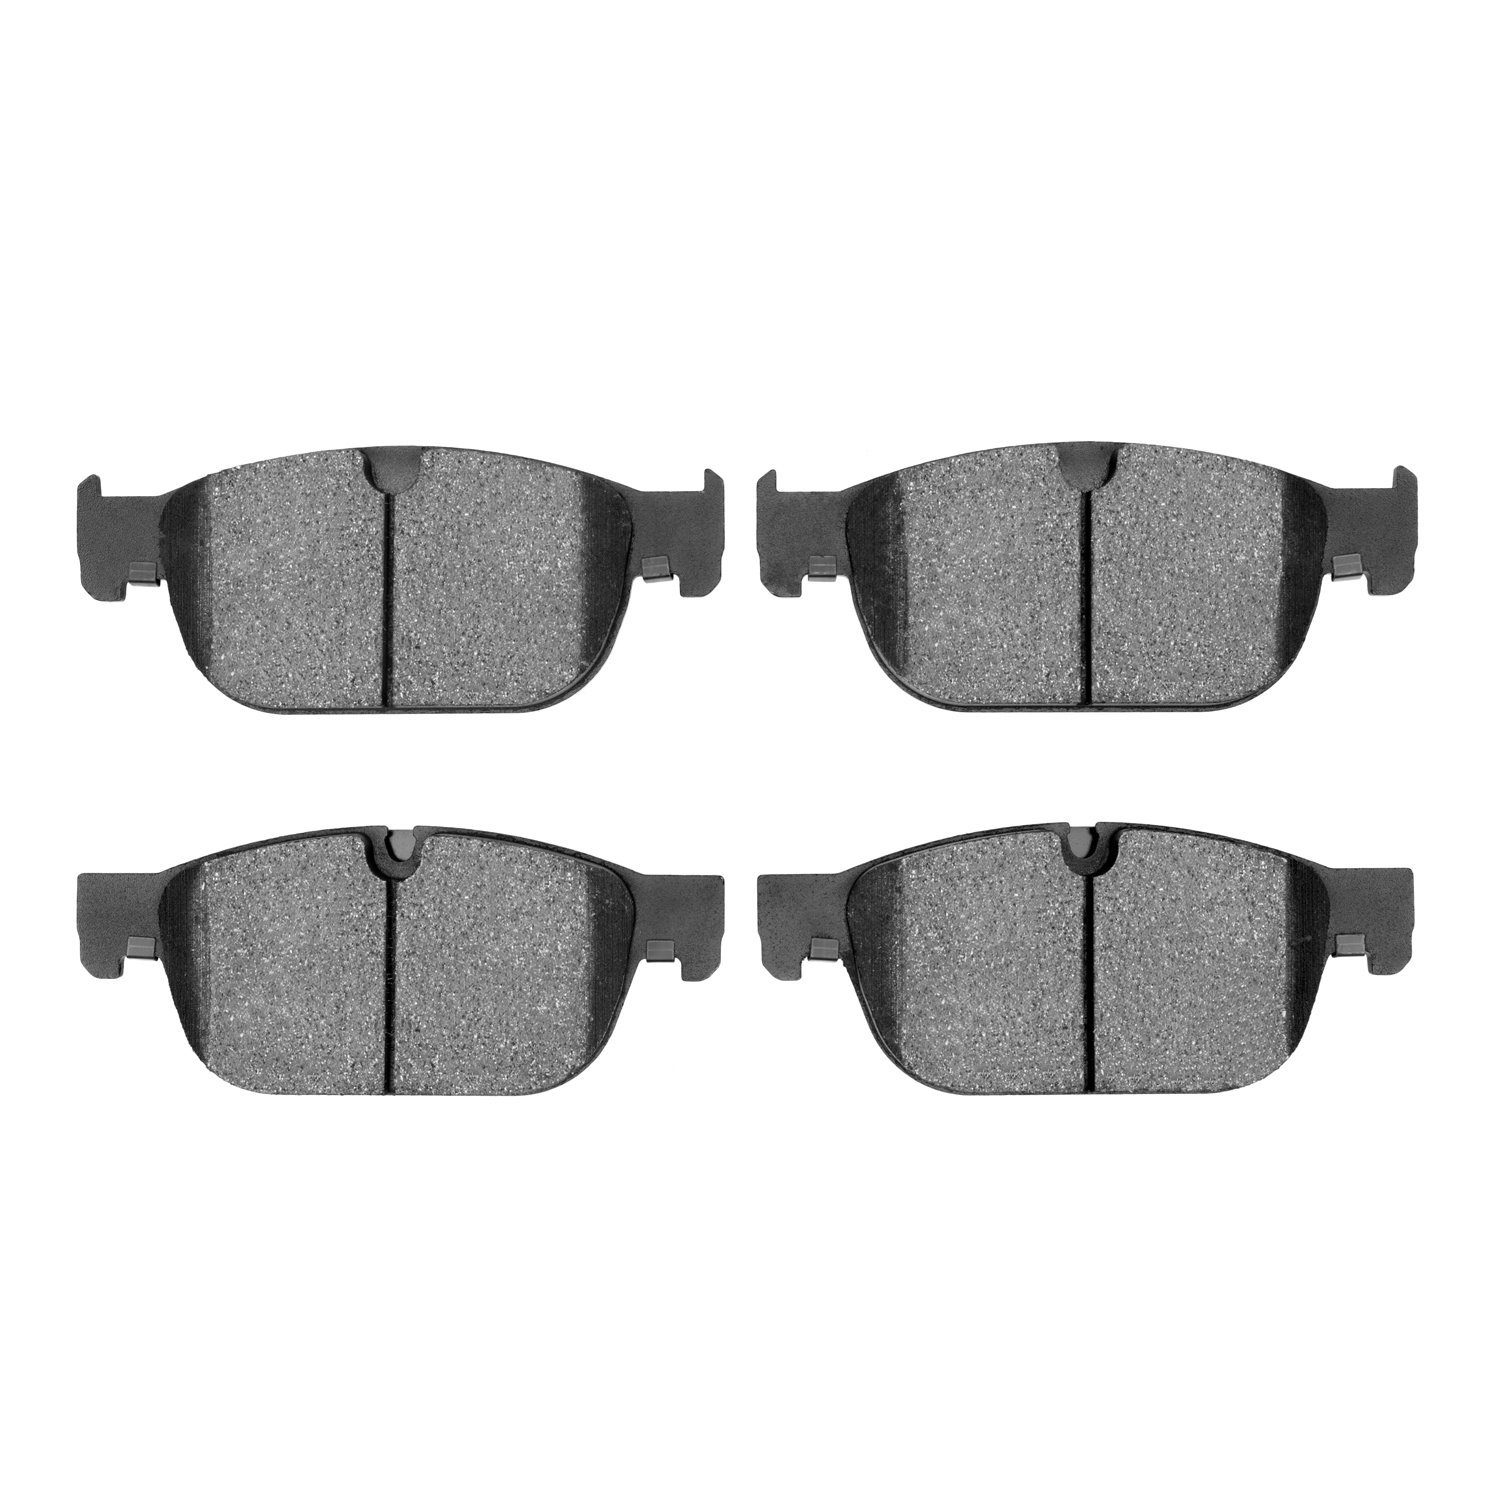 1552-1865-00 5000 Advanced Ceramic Brake Pads, Fits Select Volvo, Position: Front